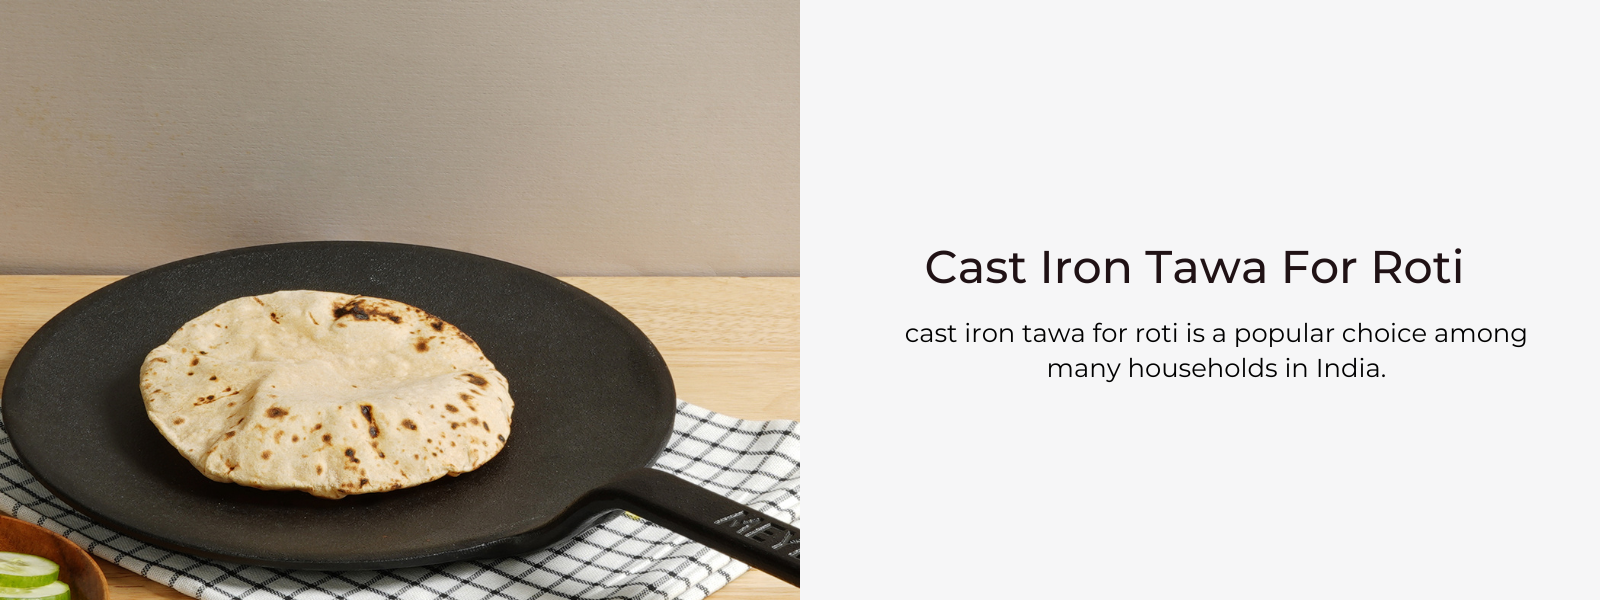 Best Cast Iron Tawa For Roti In India For Easy Cooking - PotsandPans India